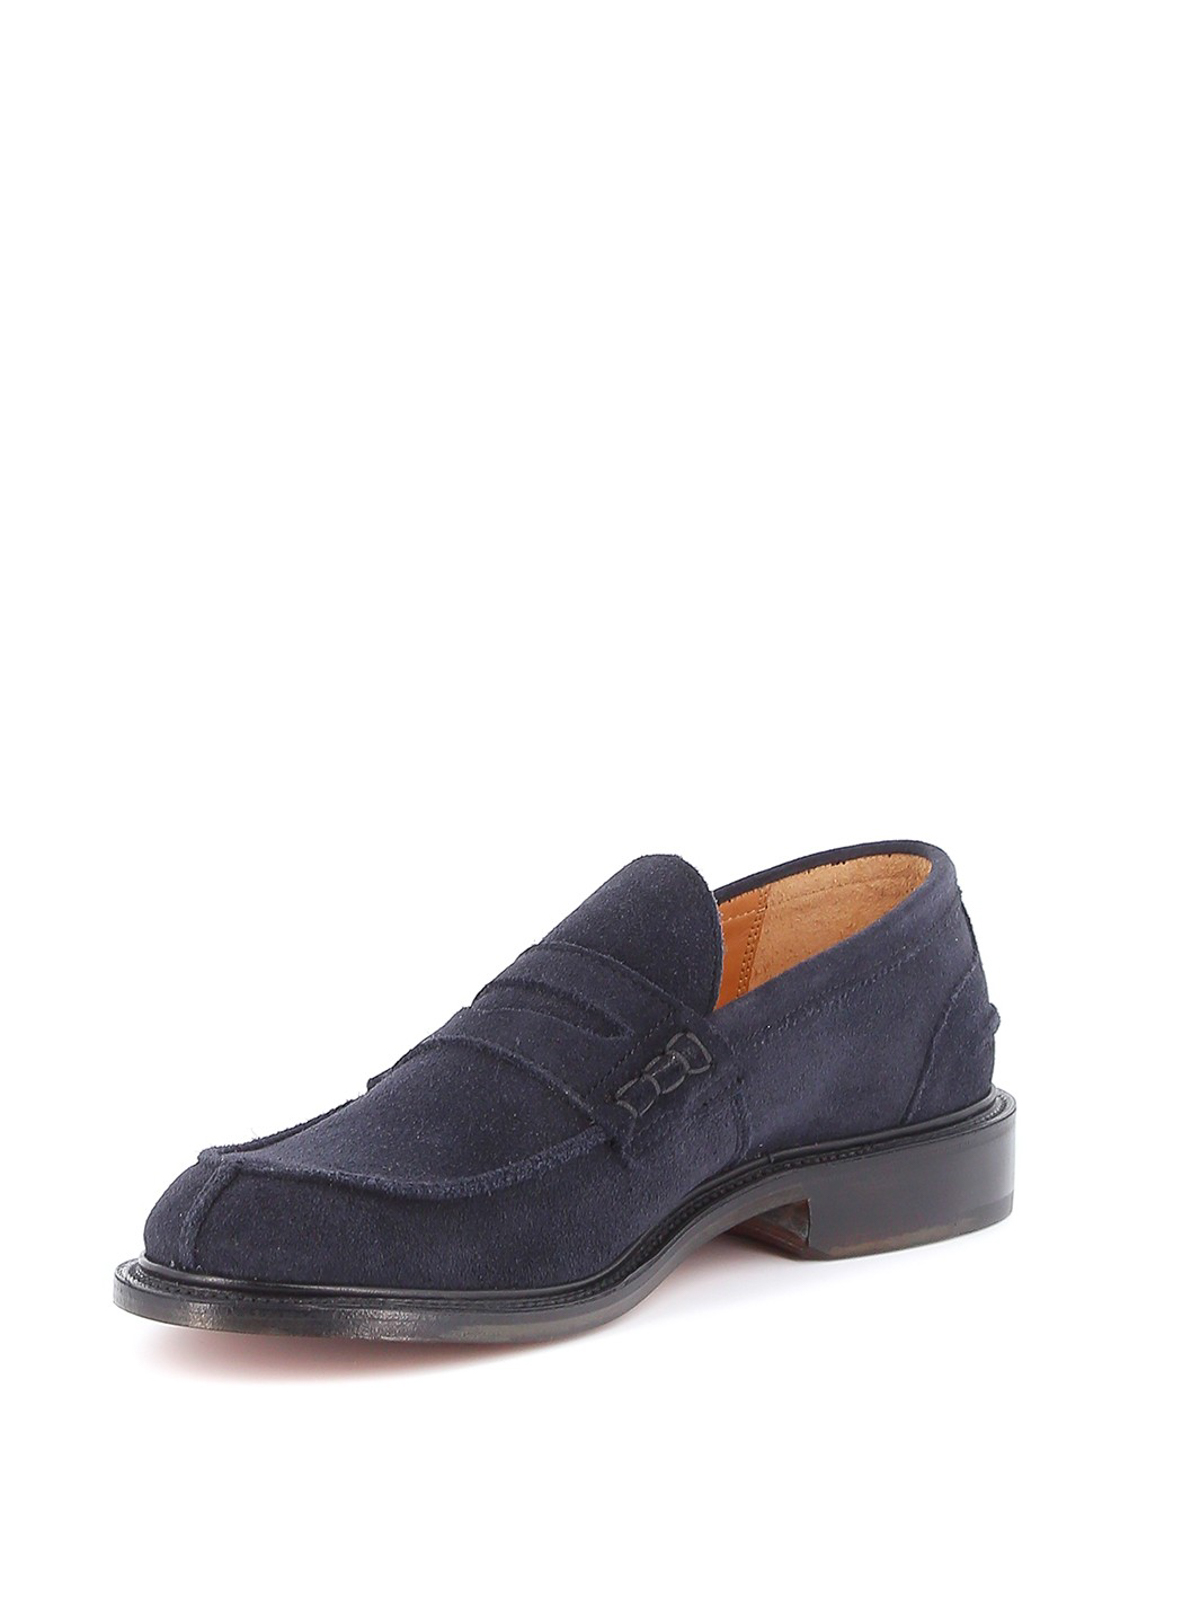 & Slippers Tricker's - James suede penny loafers - JAMESSUEDEOCEANO